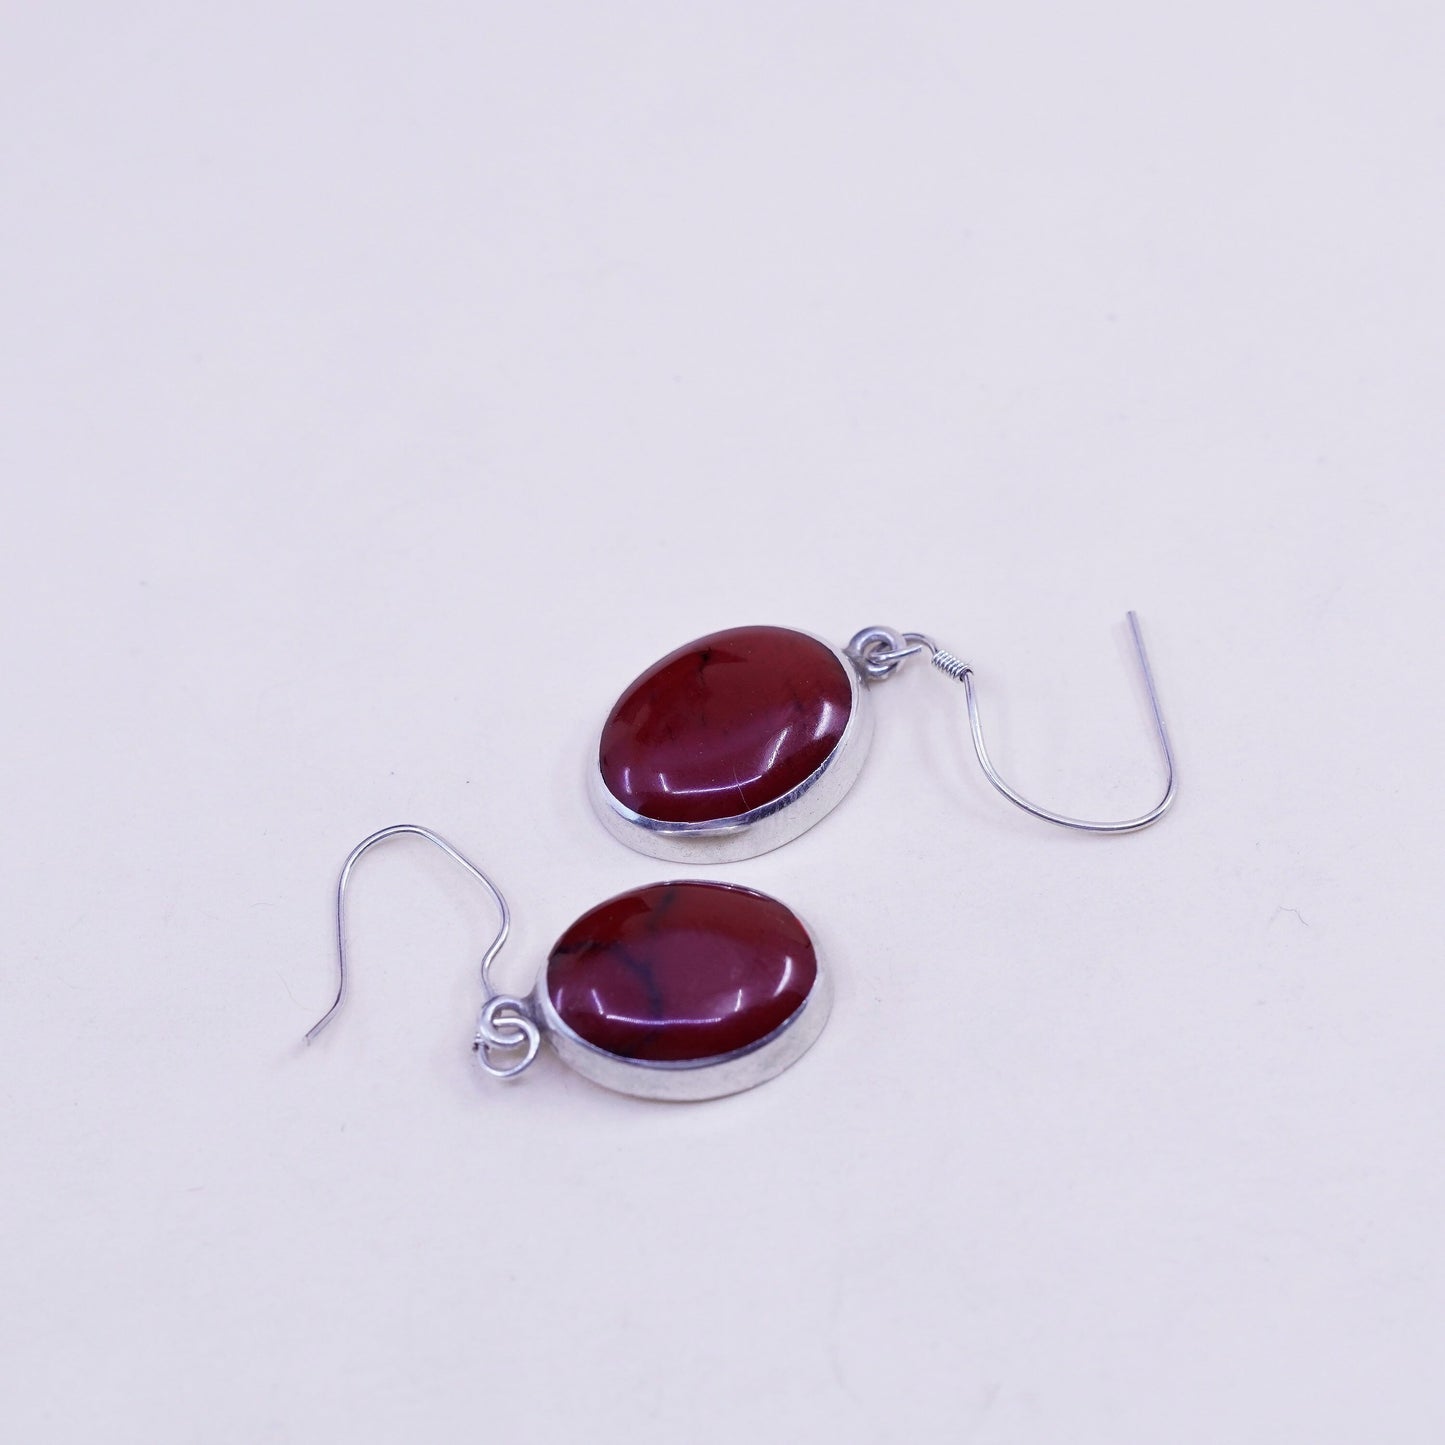 Vintage Sterling 925 silver handmade earrings with red onyx drops